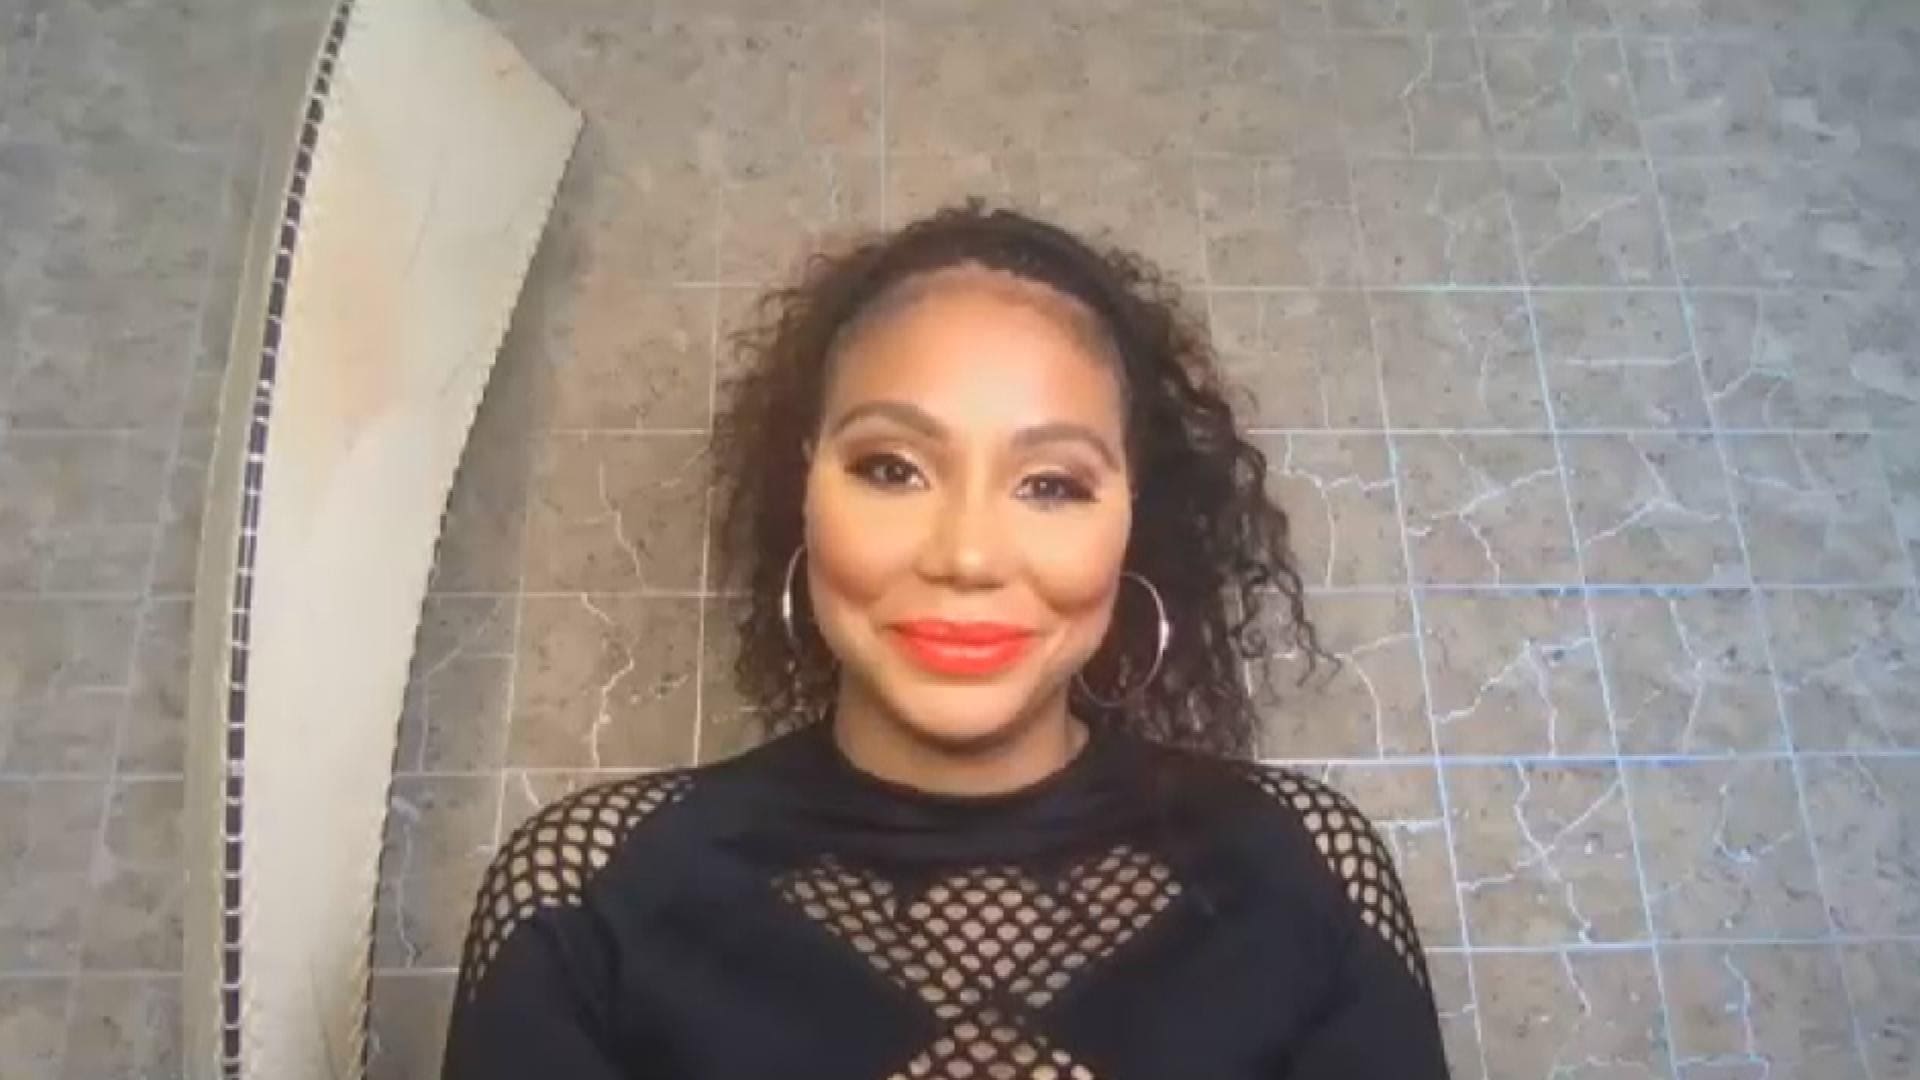 Tamar Braxton's Latest Cooking Skills And Meal Have Fans Laughing - See The Funny Video